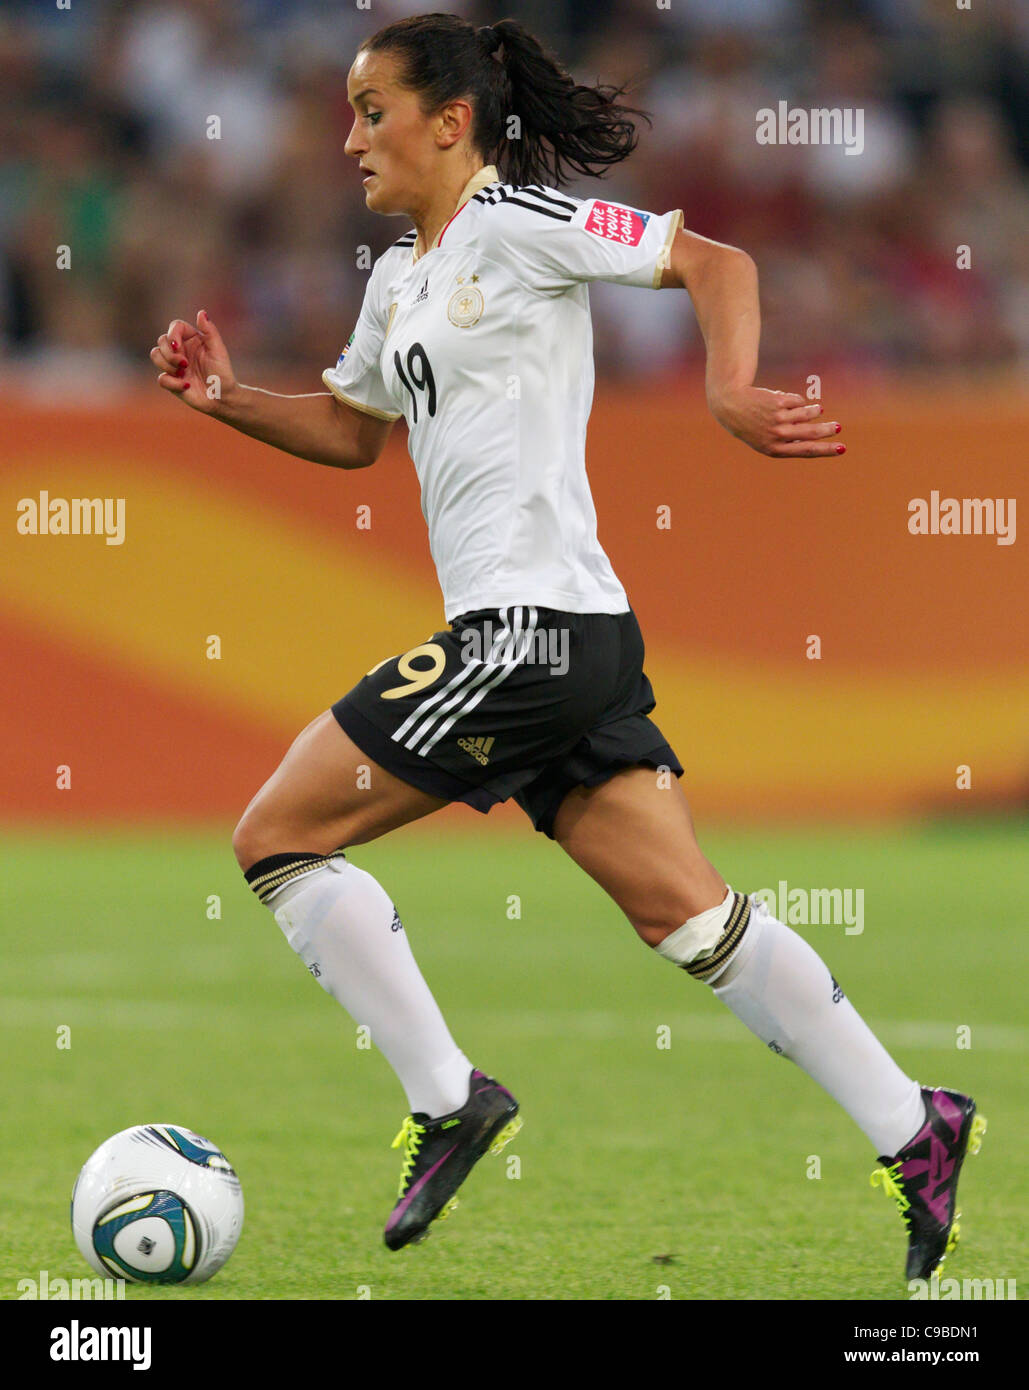 Fatmire Bajramaj of Germany attacks against France during a FIFA Women's World Cup Group A match at Stadion im Borussia Park. Stock Photo